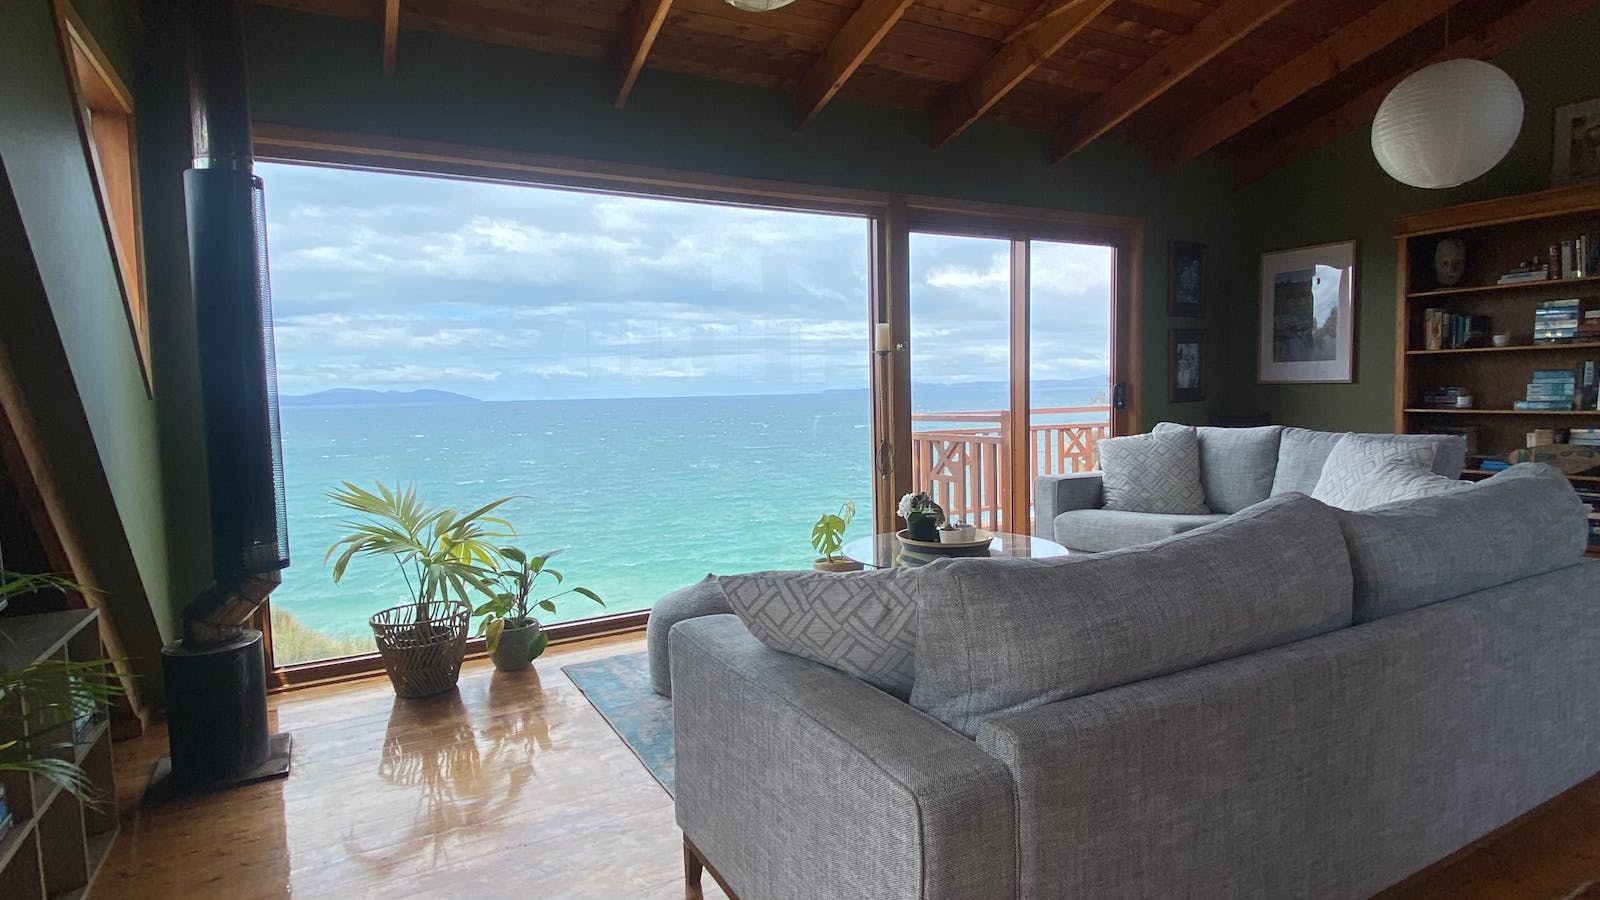 Unrivalled water views from Bluff Beach House loft, perfect for dolphin sightings and more